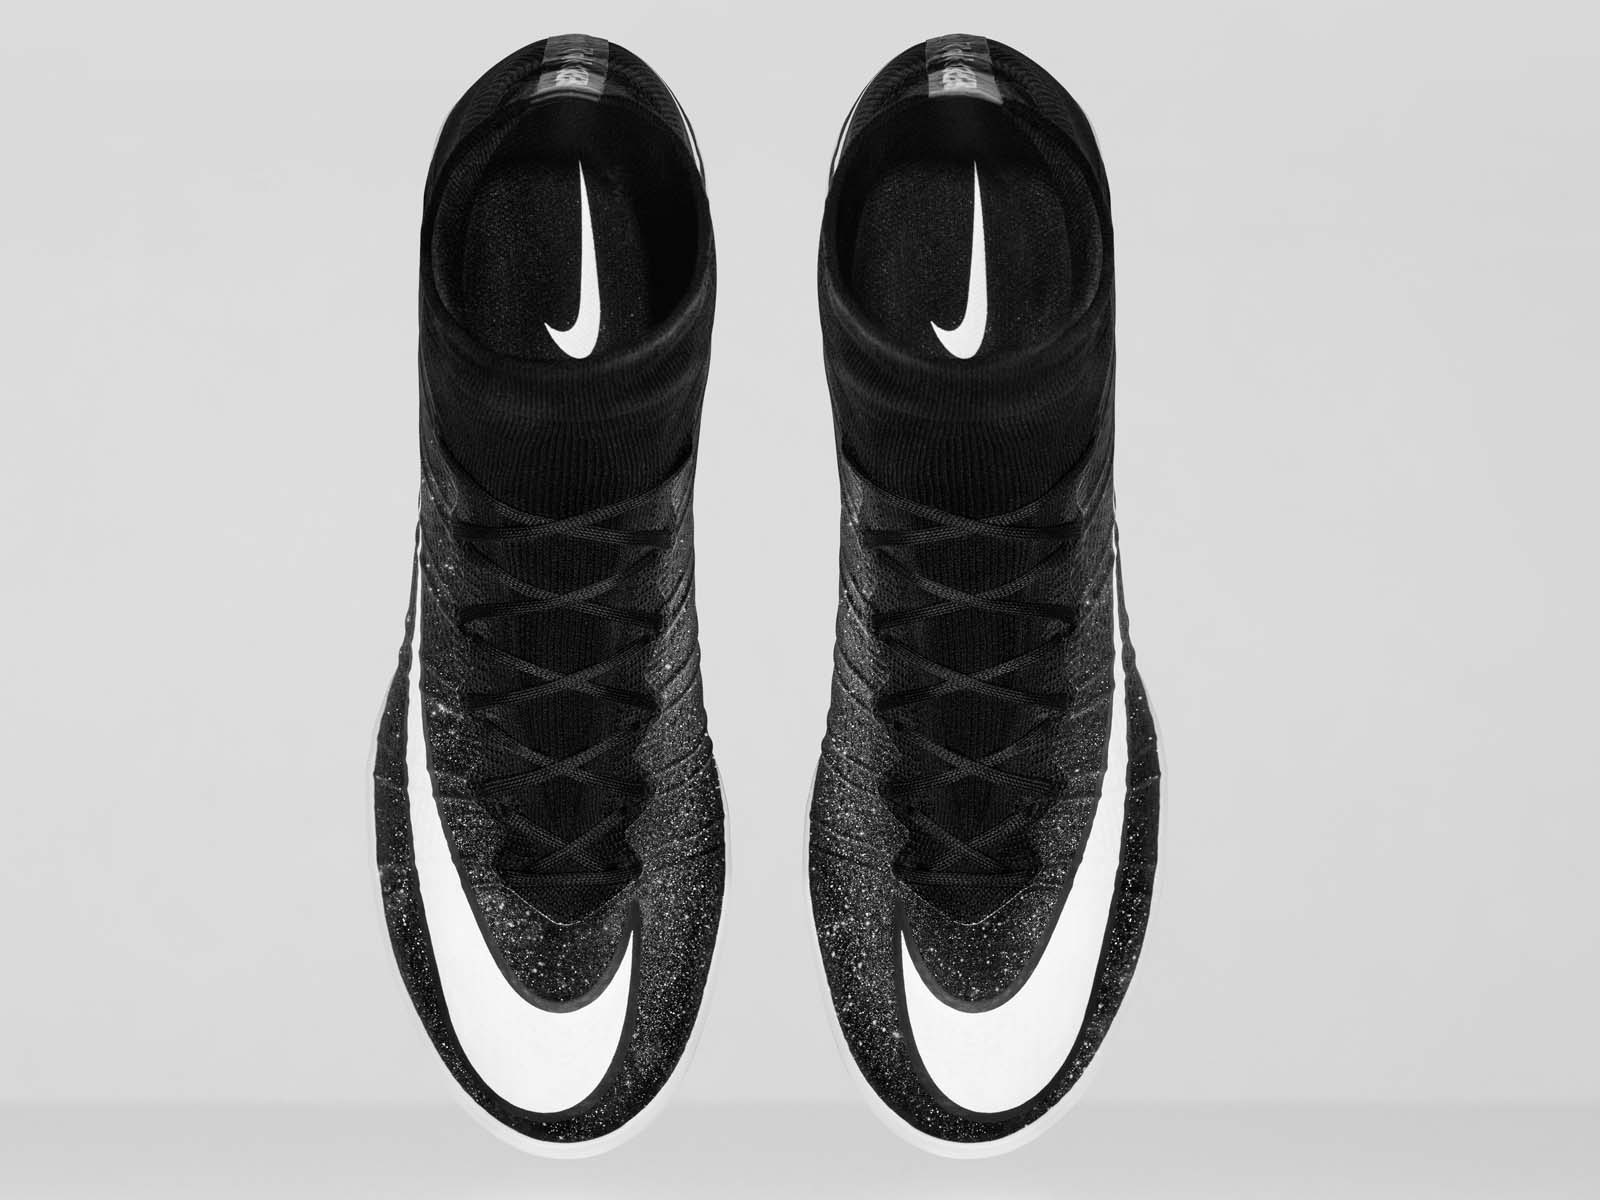 Black Nike Elastico Superfly CR7 Boots Launched